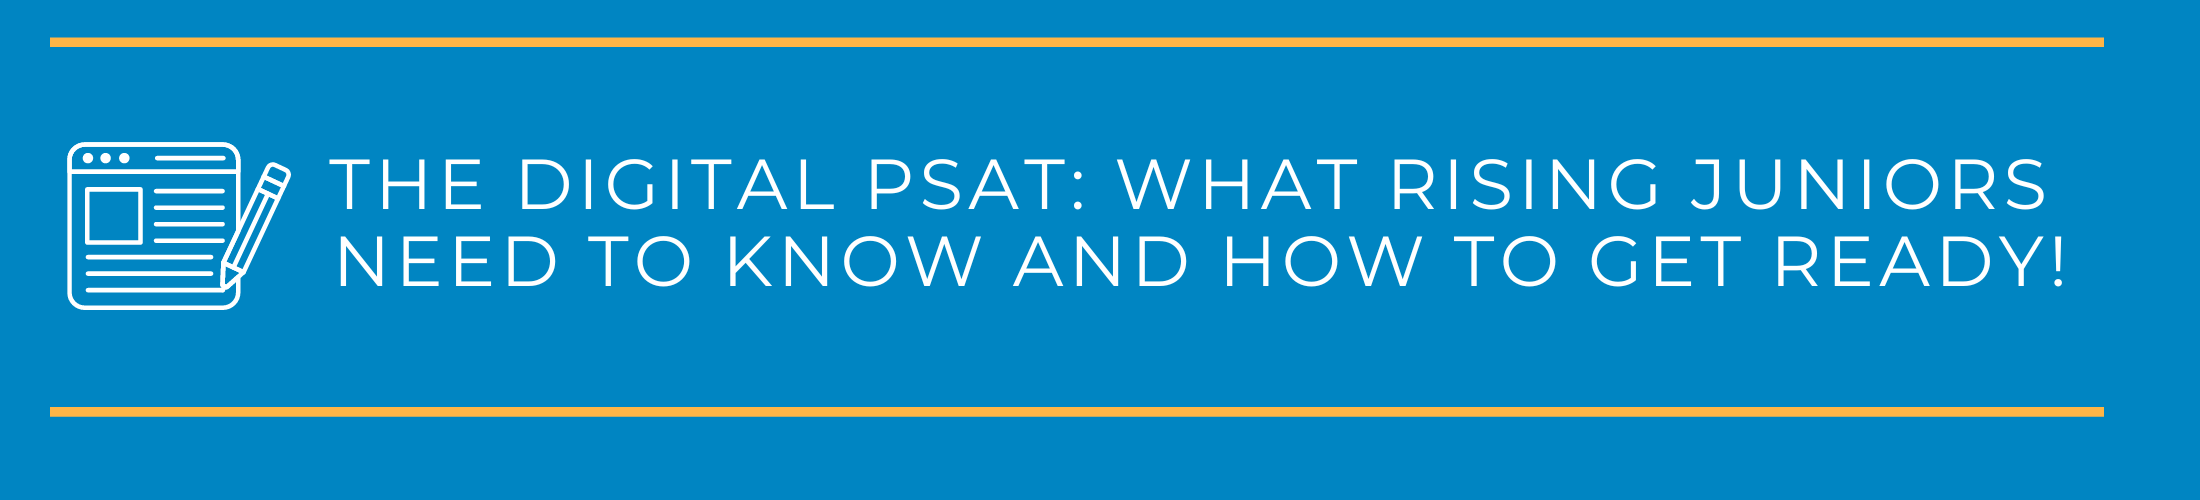 The Digital PSAT: What Rising Juniors Need to Know and How to Get Ready!